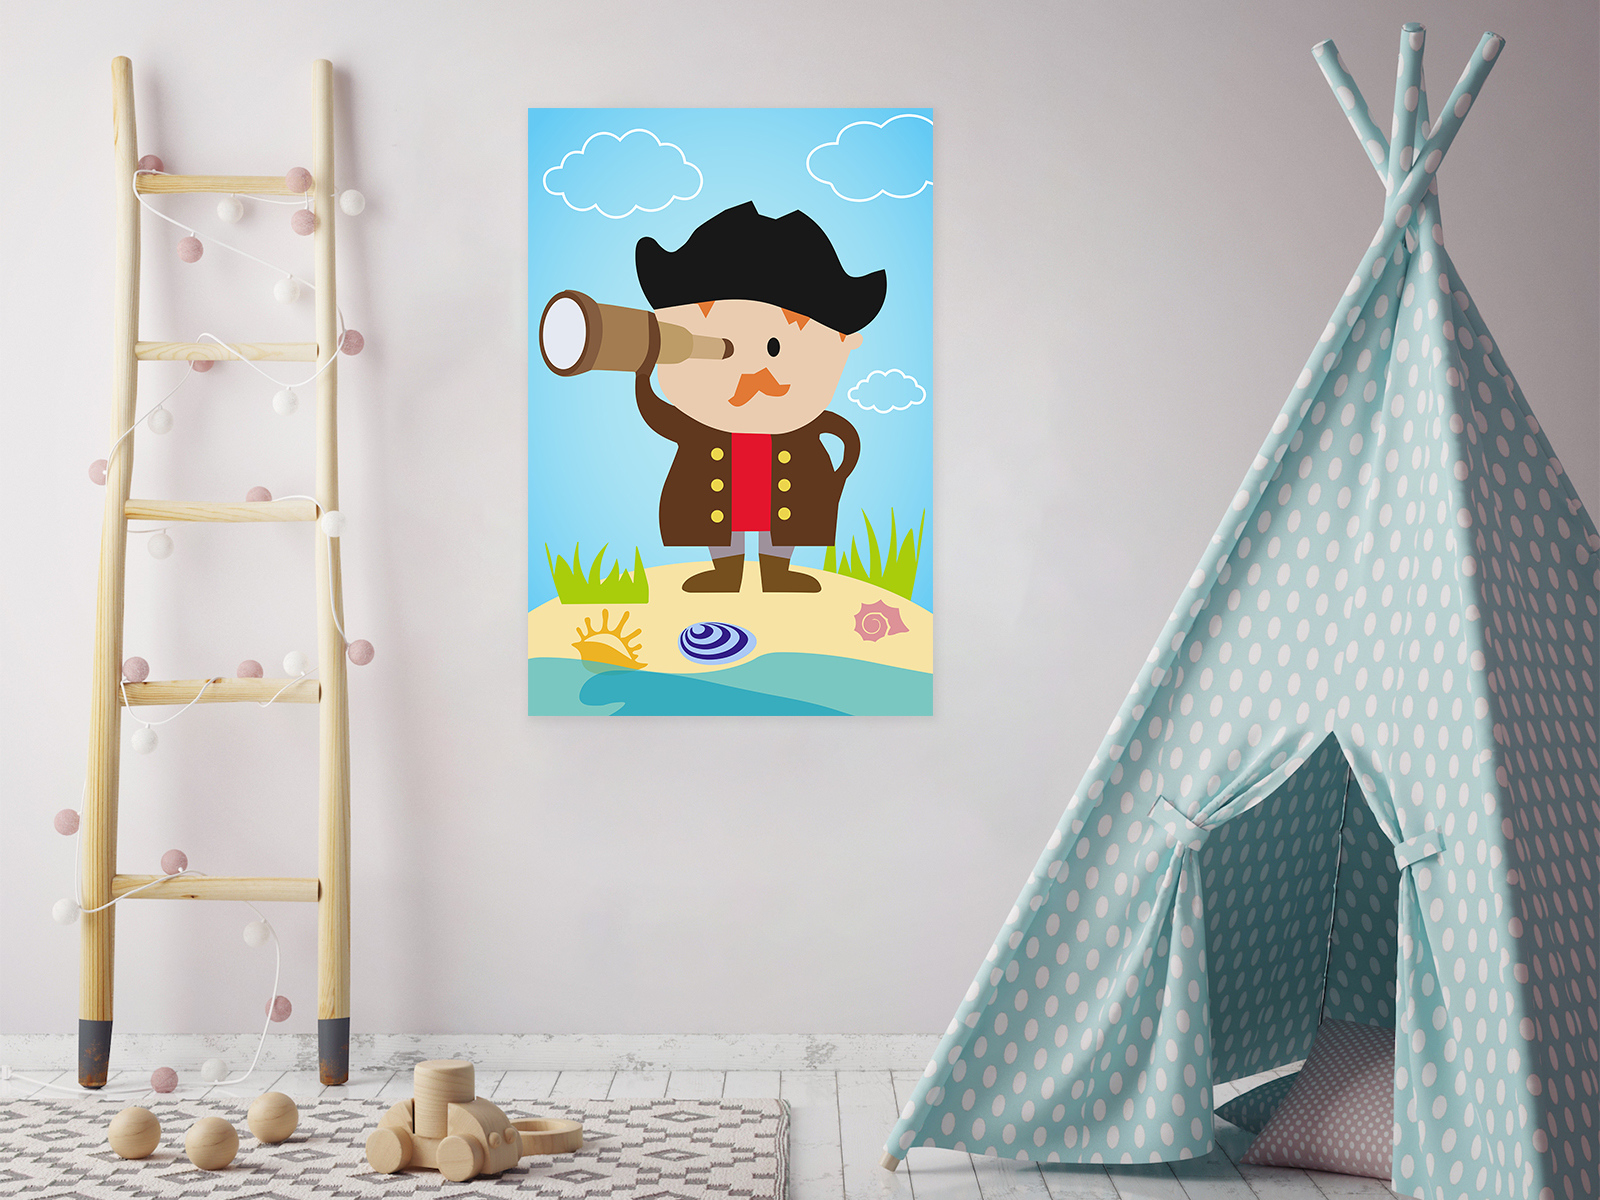 Awkward Styles Marine Picture Kids Play Room Wall Art Cute Pirates Art Newborn Baby Room Wall Decor Pirates Wallpapers Made in USA Little Pirate Picture Pirate Poster Print Kids Room Wall Art - image 2 of 3